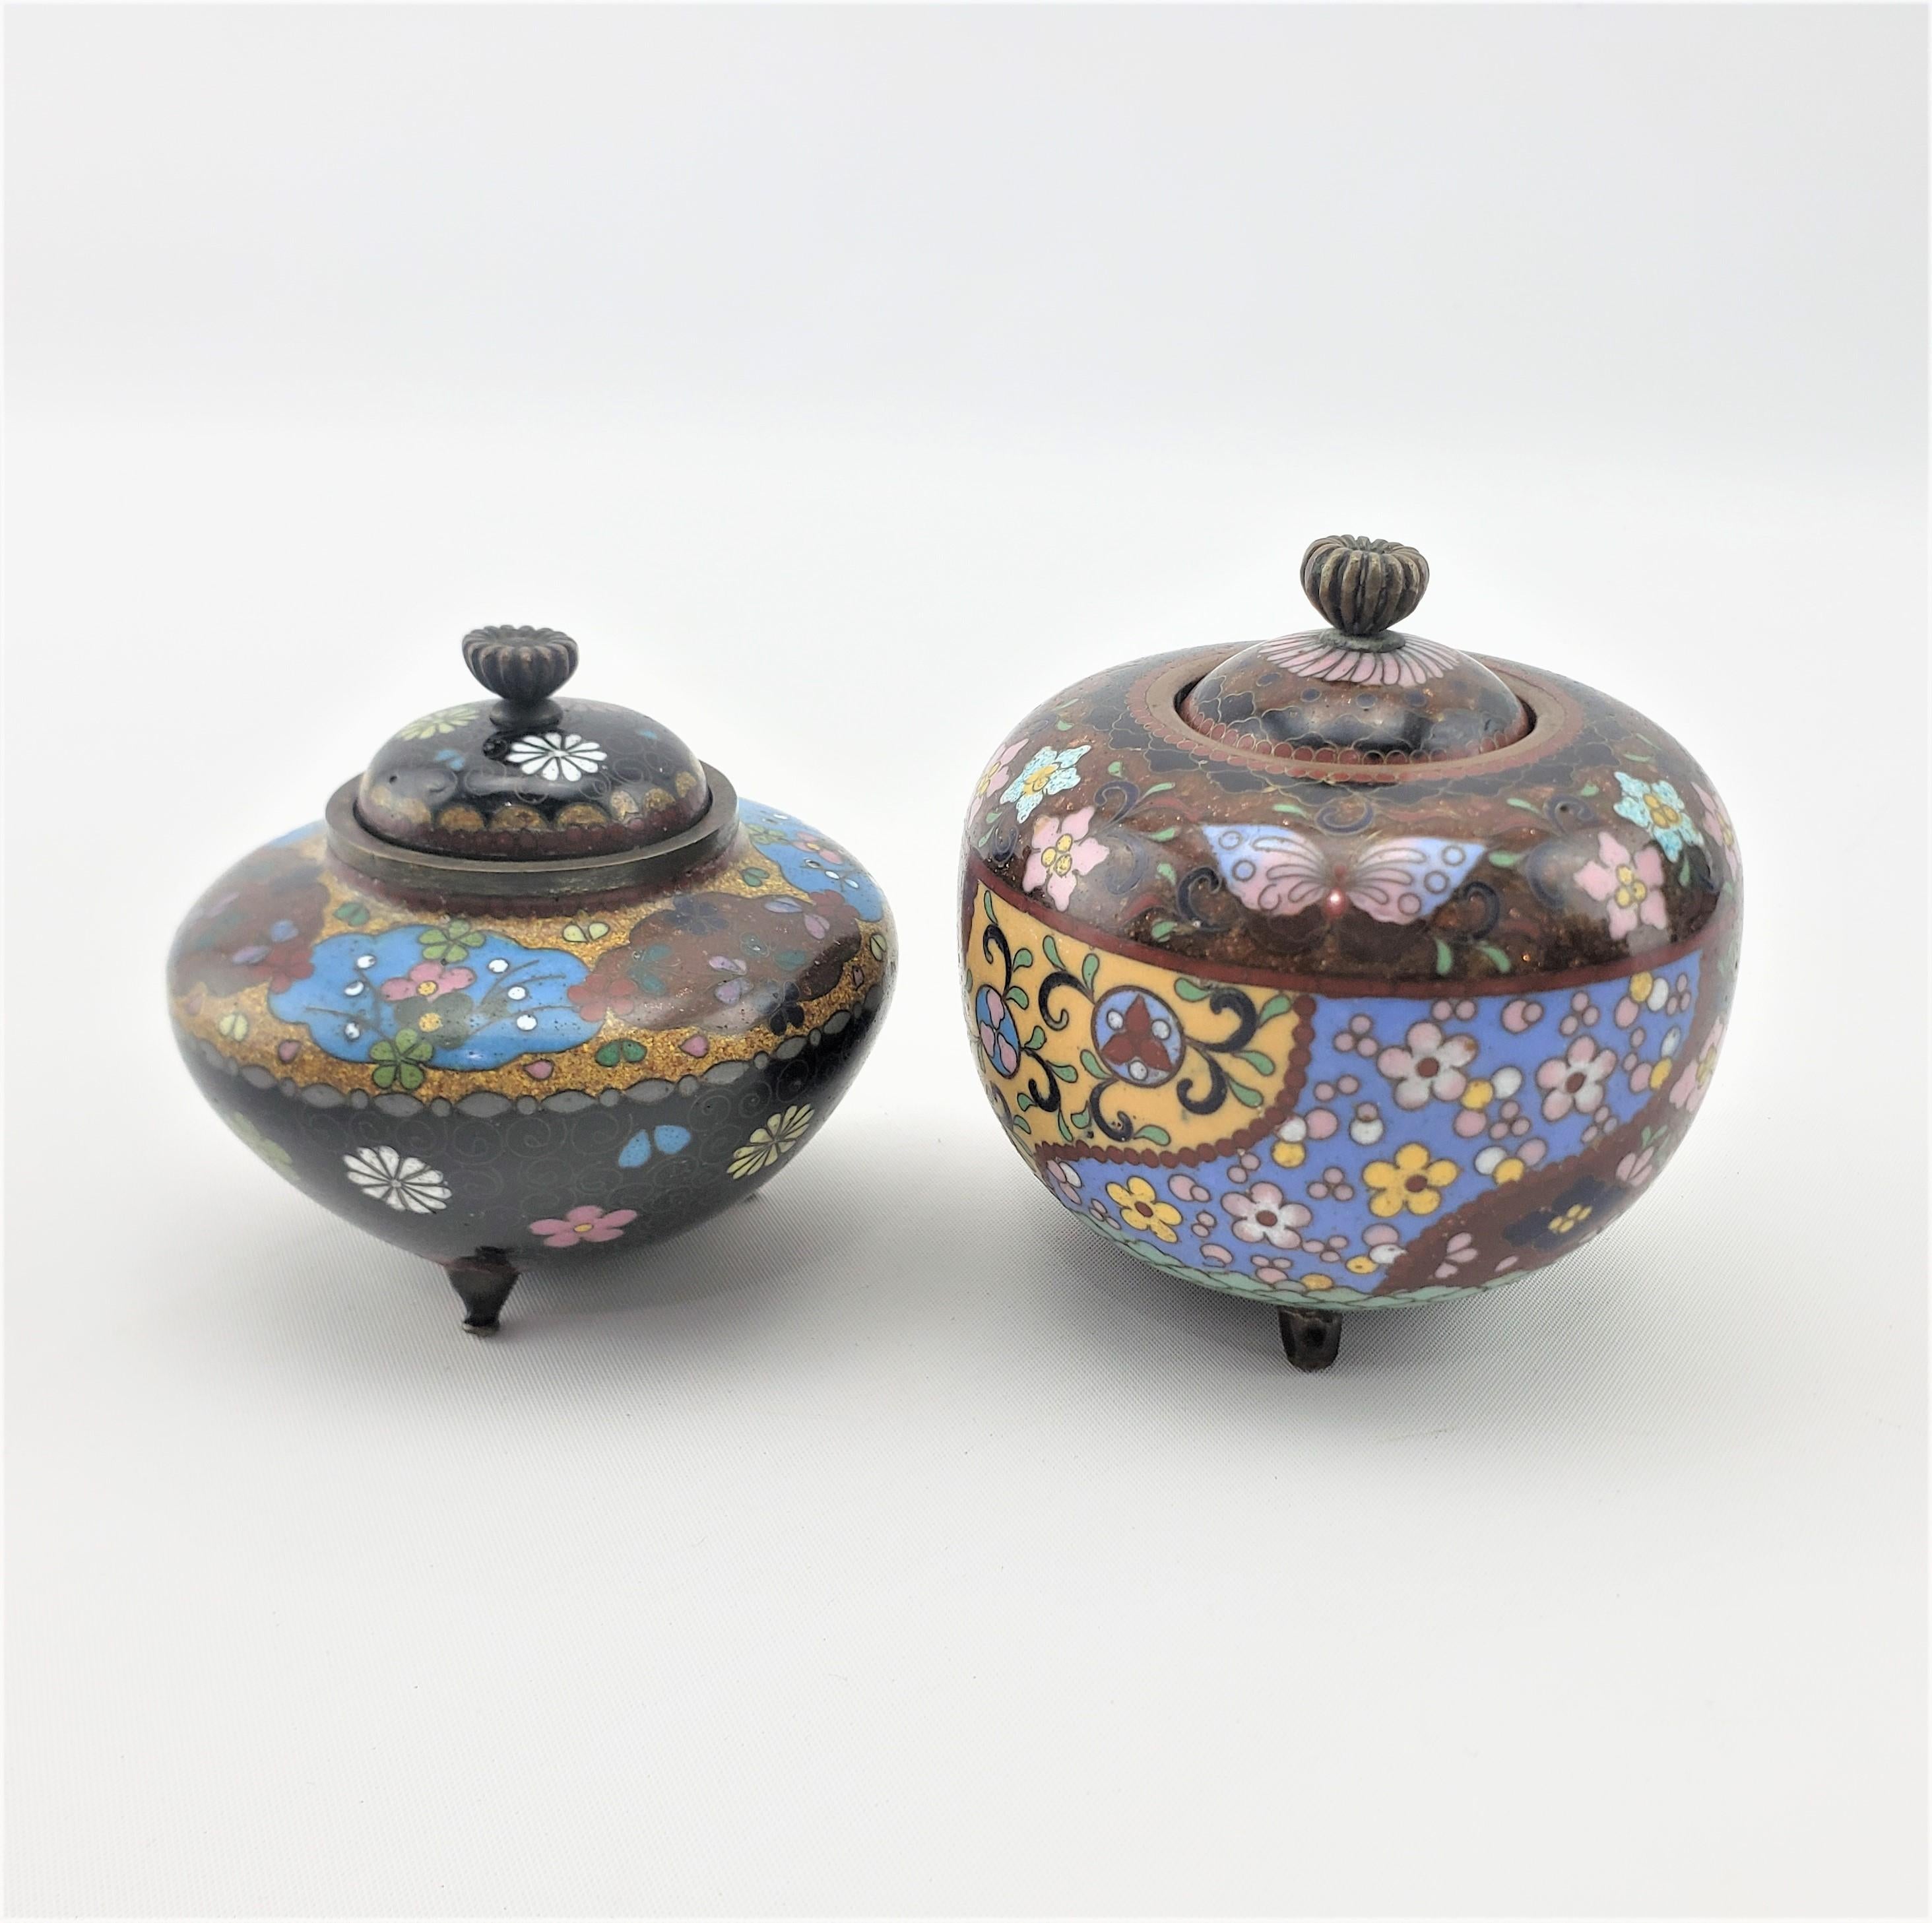 This pair of antique cloisonne covered jars or urns are unsigned, but originate from Japan from approximately 1900 in a Japanese export style. The pair is done in muted tones and are decorated with a floral motif.